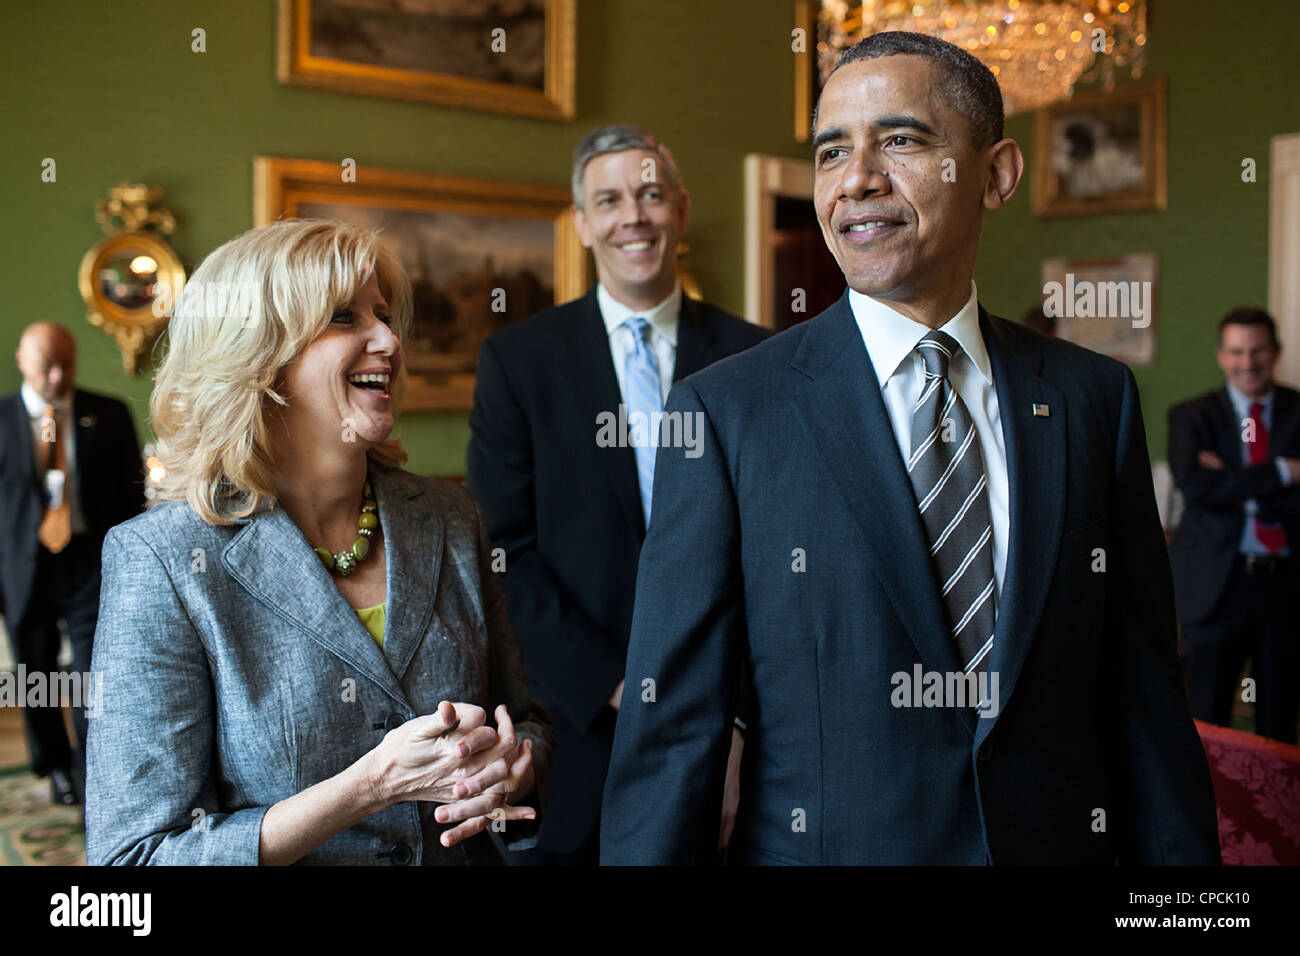 President Barack Obama waits with 2012 National Teacher of the Year, Rebecca Mieliwocki, and Education Secretary Arne Duncan in the Green Room of the White House before the start of a ceremony to honor the 2012 National and State Teachers of the Year April 24, 2012 in Washington, DC. Stock Photo